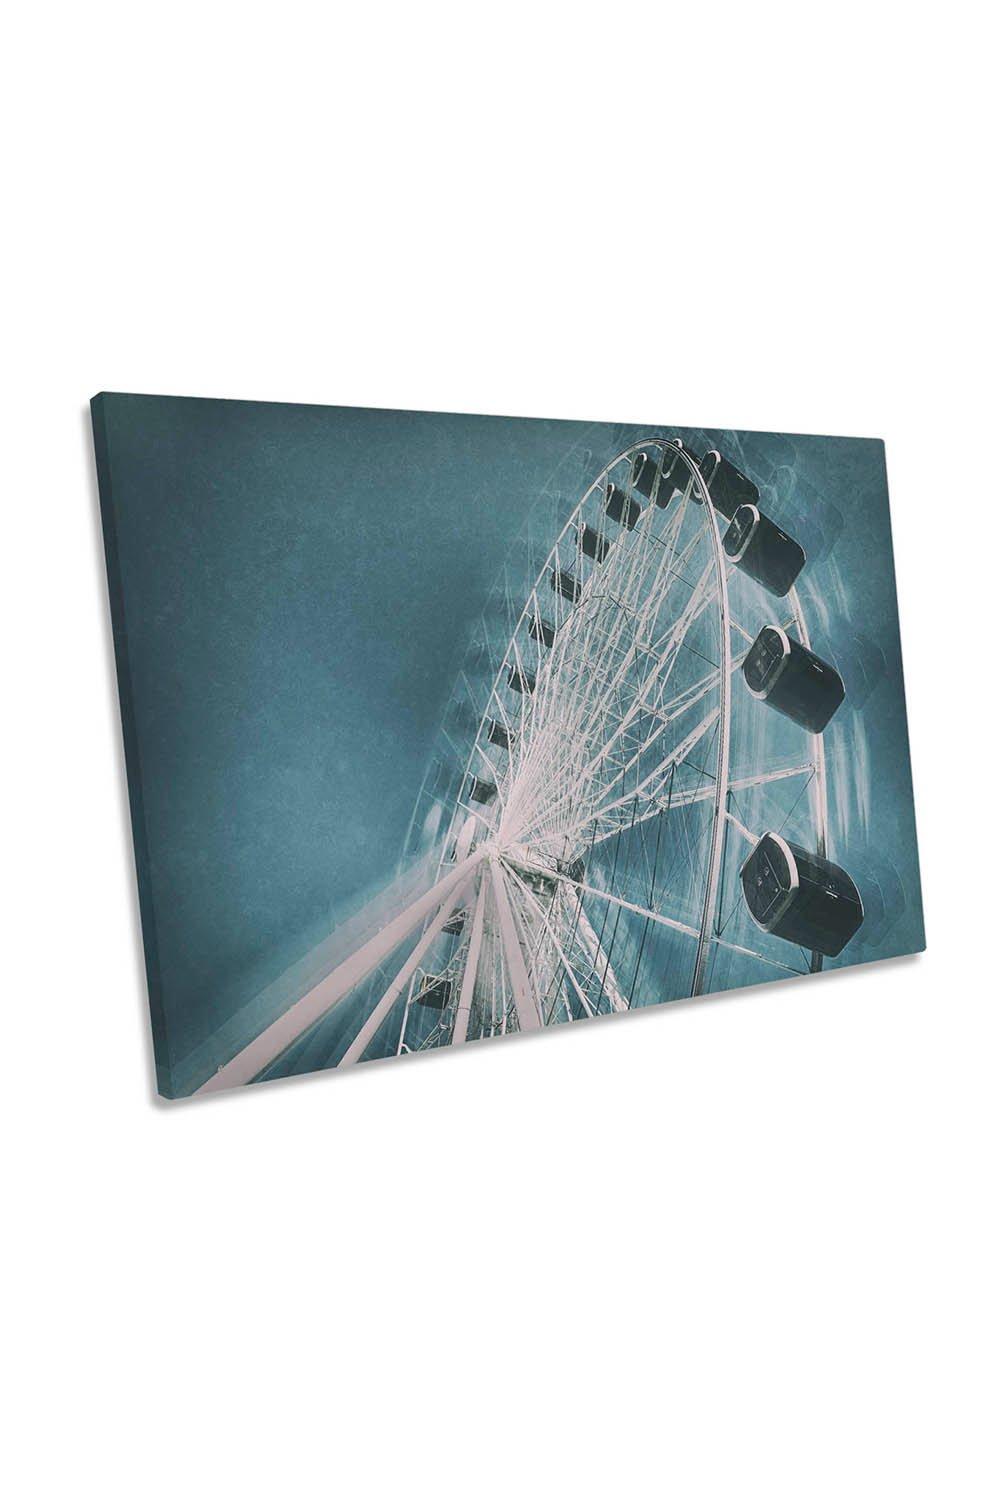 Completely Detached Surreal Ferris Wheel Canvas Wall Art Picture Print